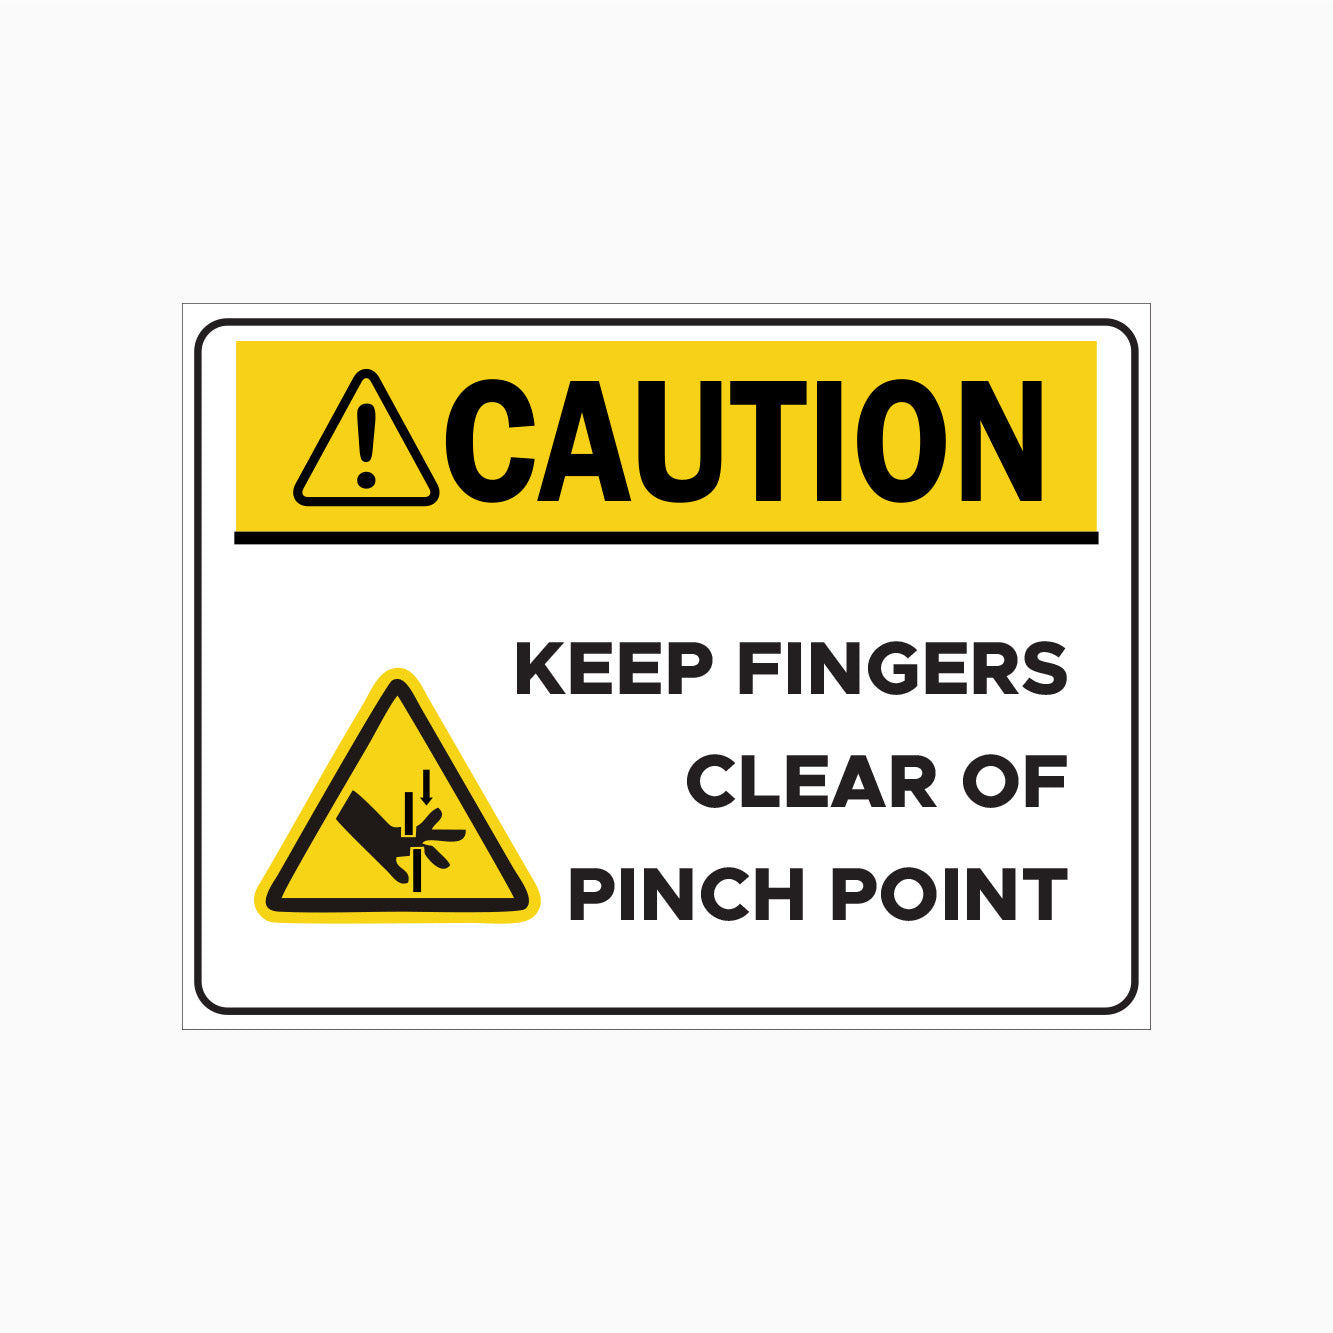 CAUTION SIGN - KEEP FINGERS CLEAR OF PINCH POINT SIGN